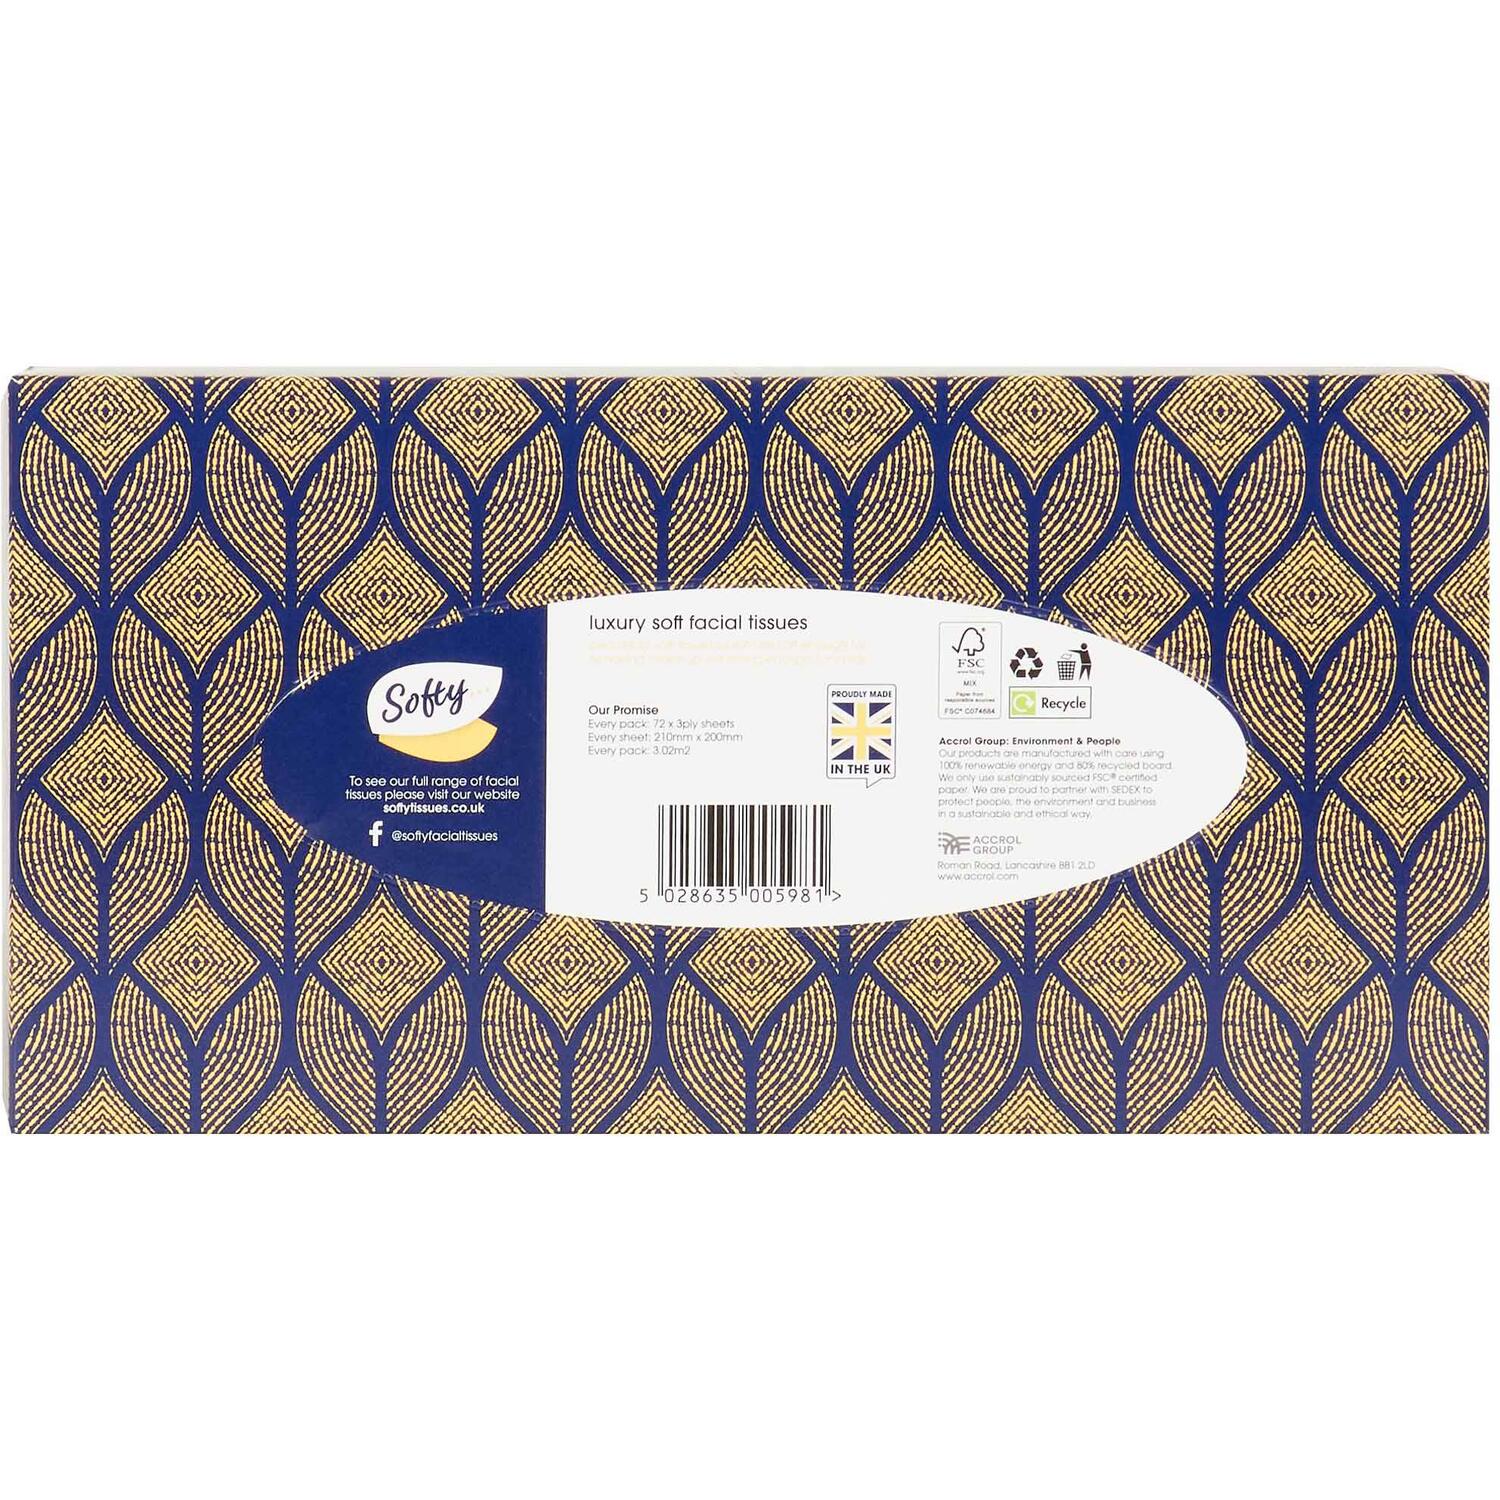 Softy Luxury Soft Tissues 72 Sheets 3 Ply Image 3